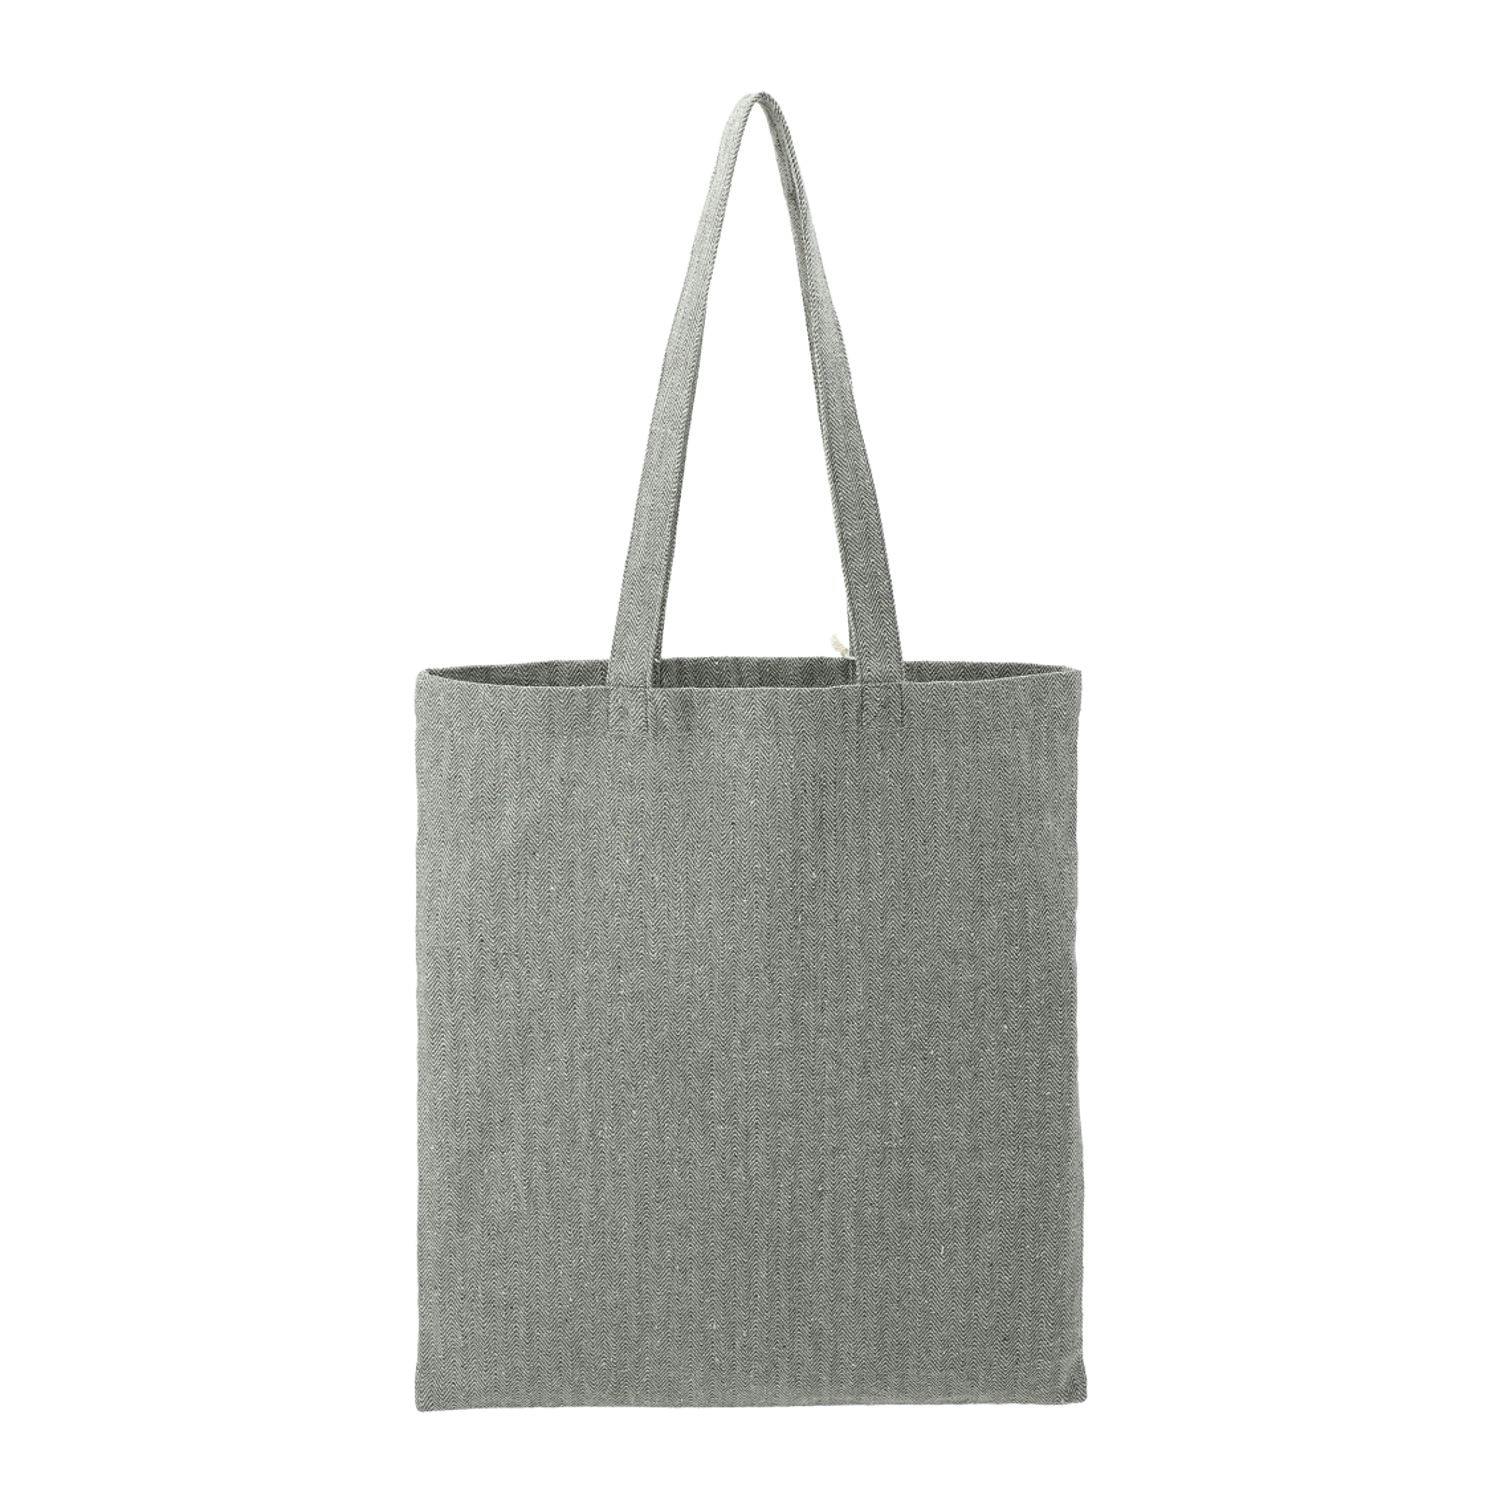 Recycled Cotton Herringbone Tote w/Zip Pocket - additional Image 1